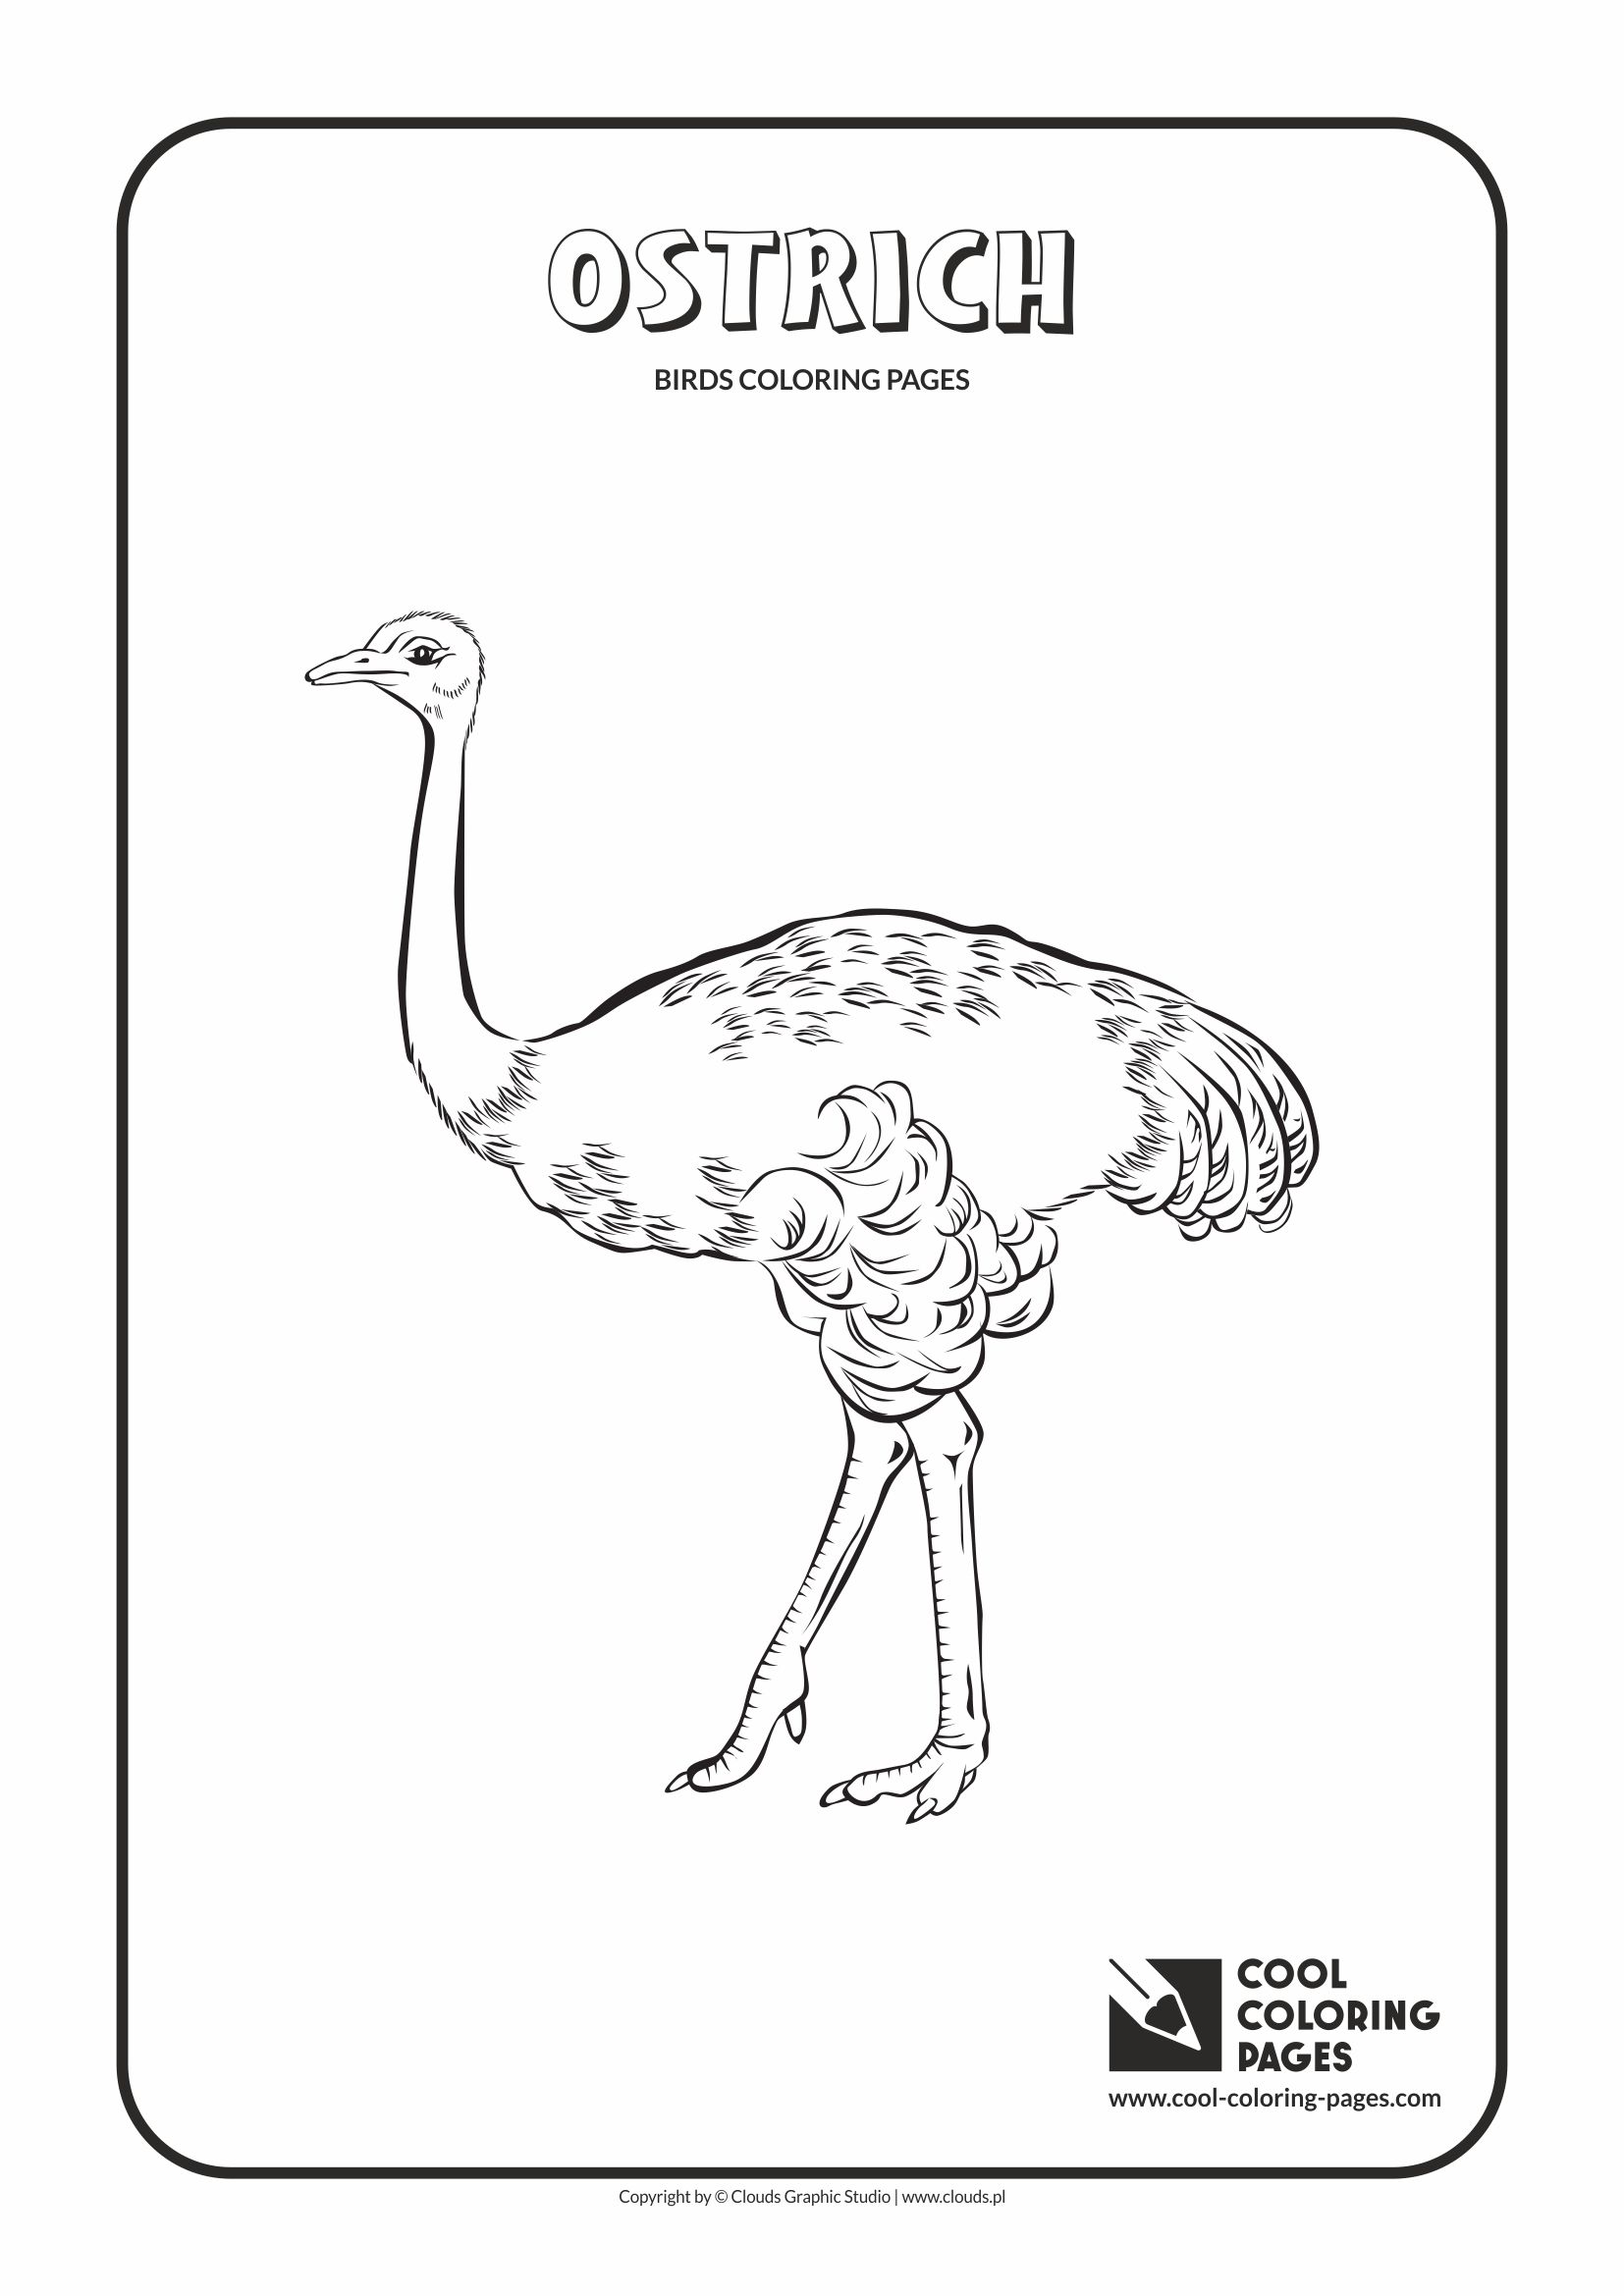 Cool Coloring Pages - Animals / Ostrich / Coloring page with ostrich